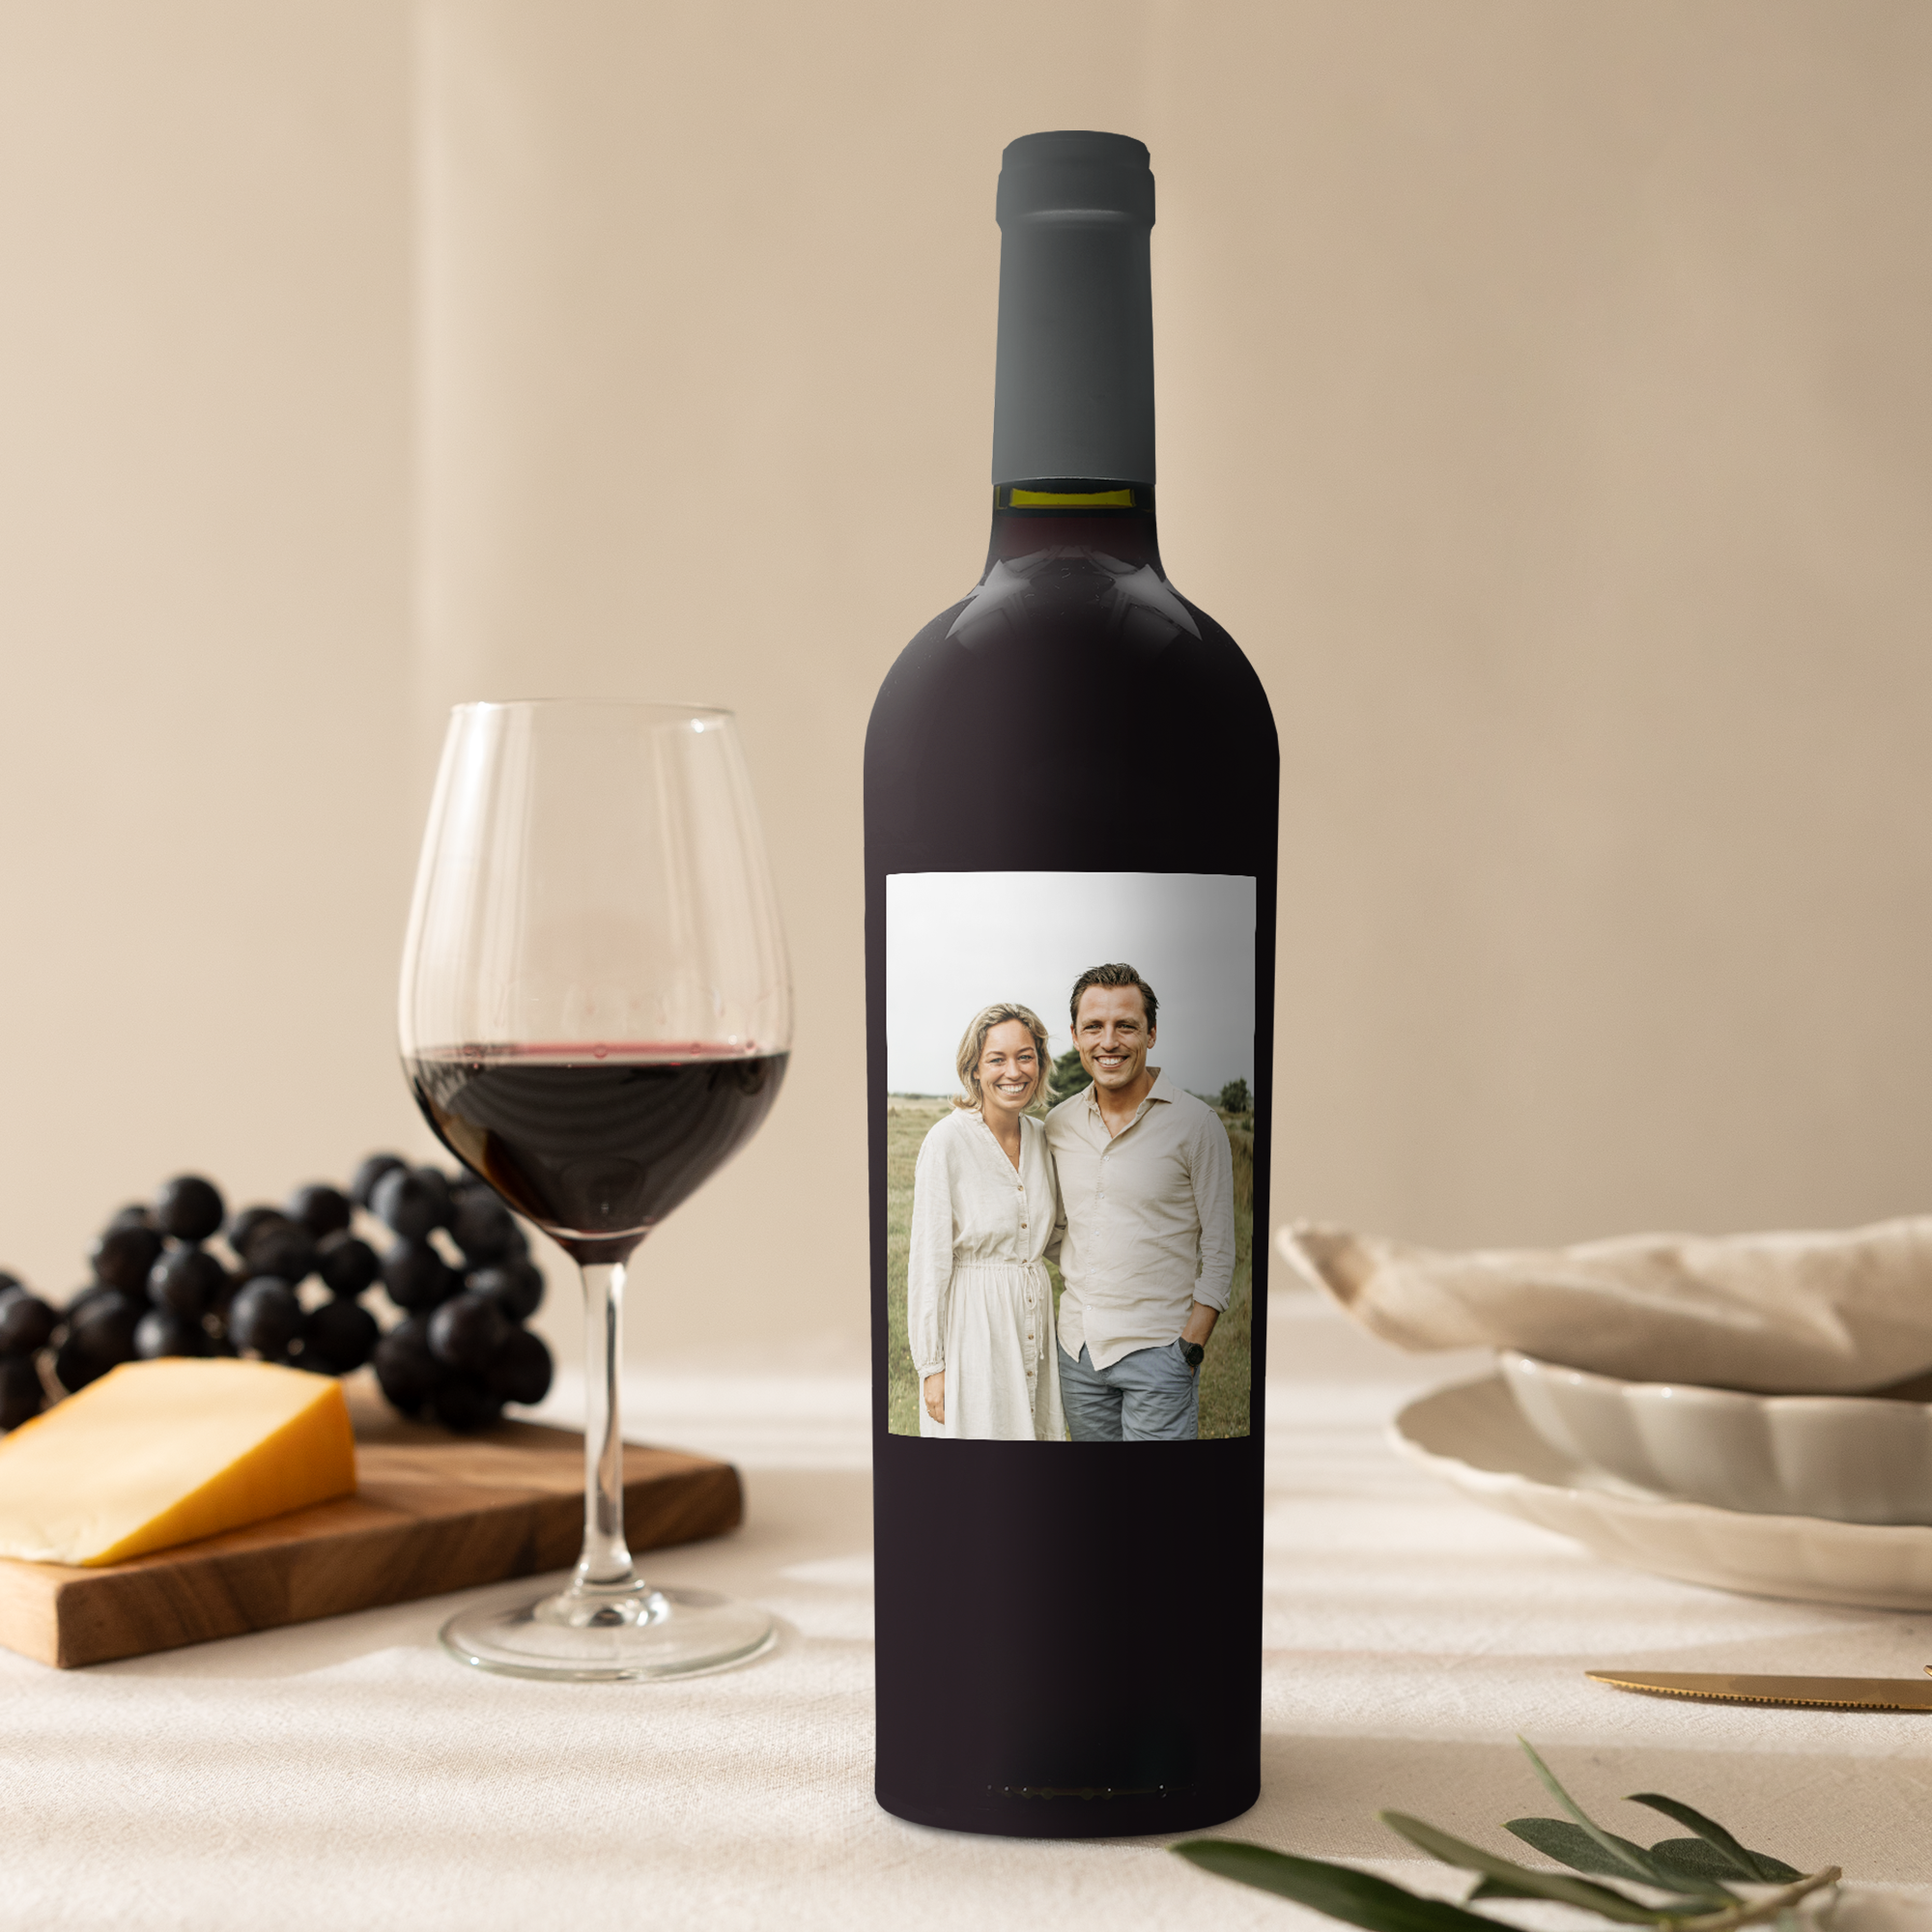 Wine with personalised label - Riondo Merlot